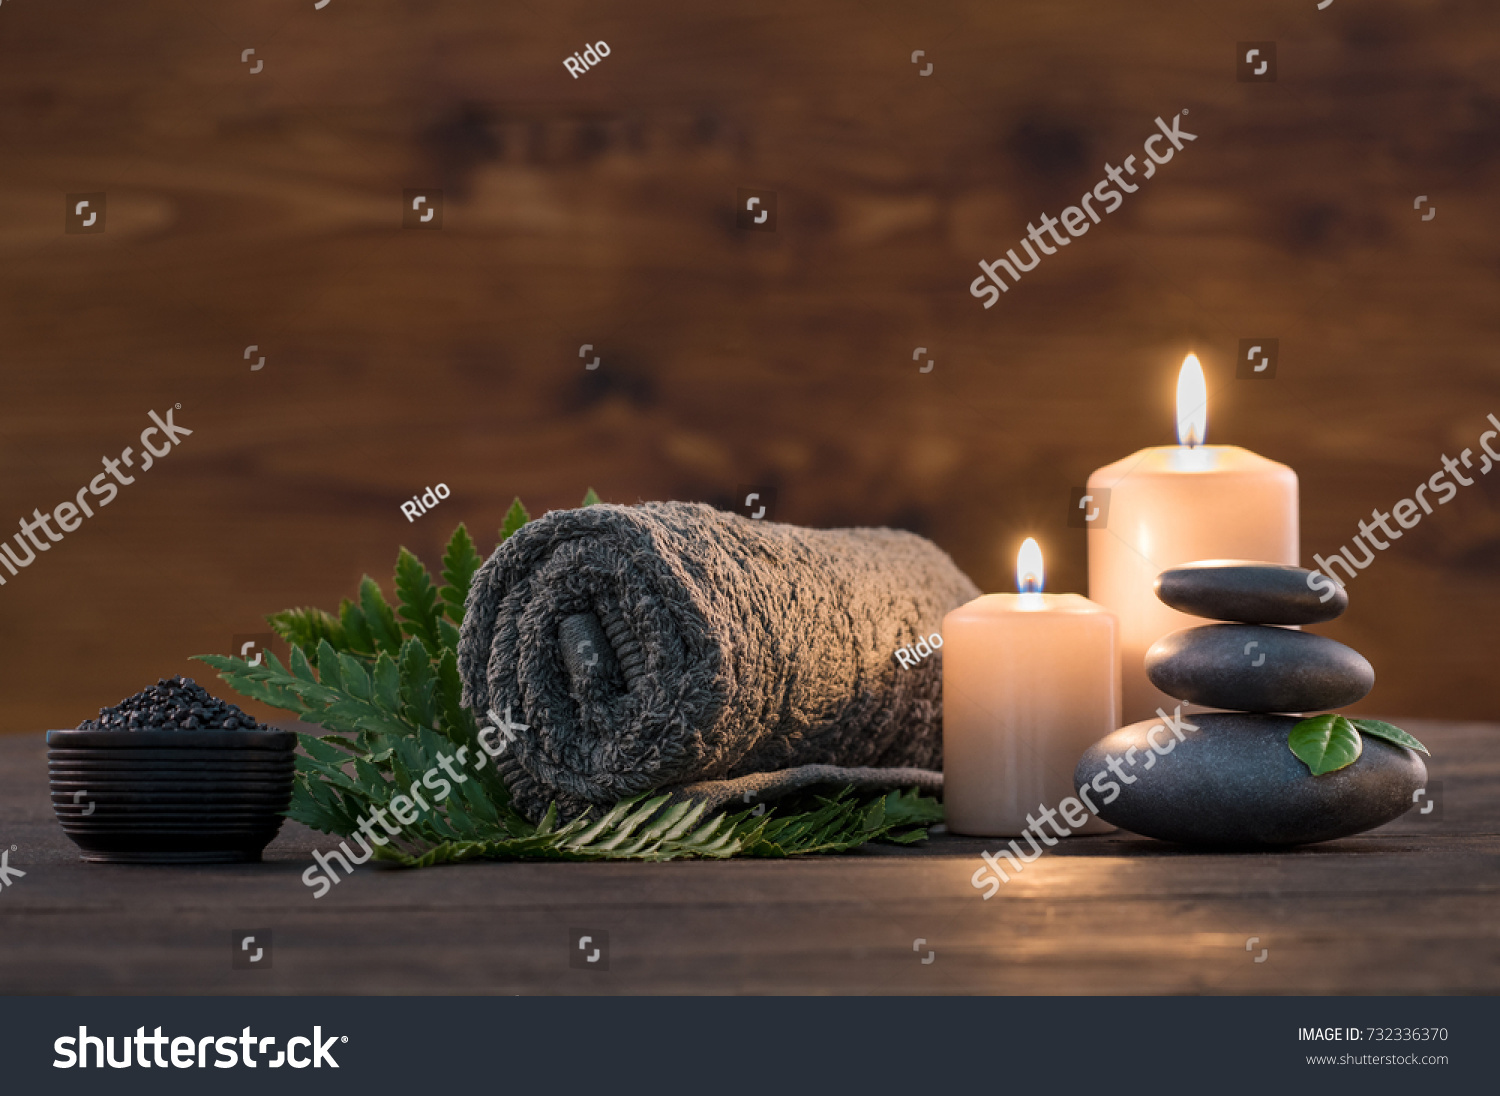 Towel on fern with candles and black hot stone on wooden background. Hot stone massage setting lit by candles. Massage therapy for one person with candle light. Beauty spa treatment and relax concept. #732336370